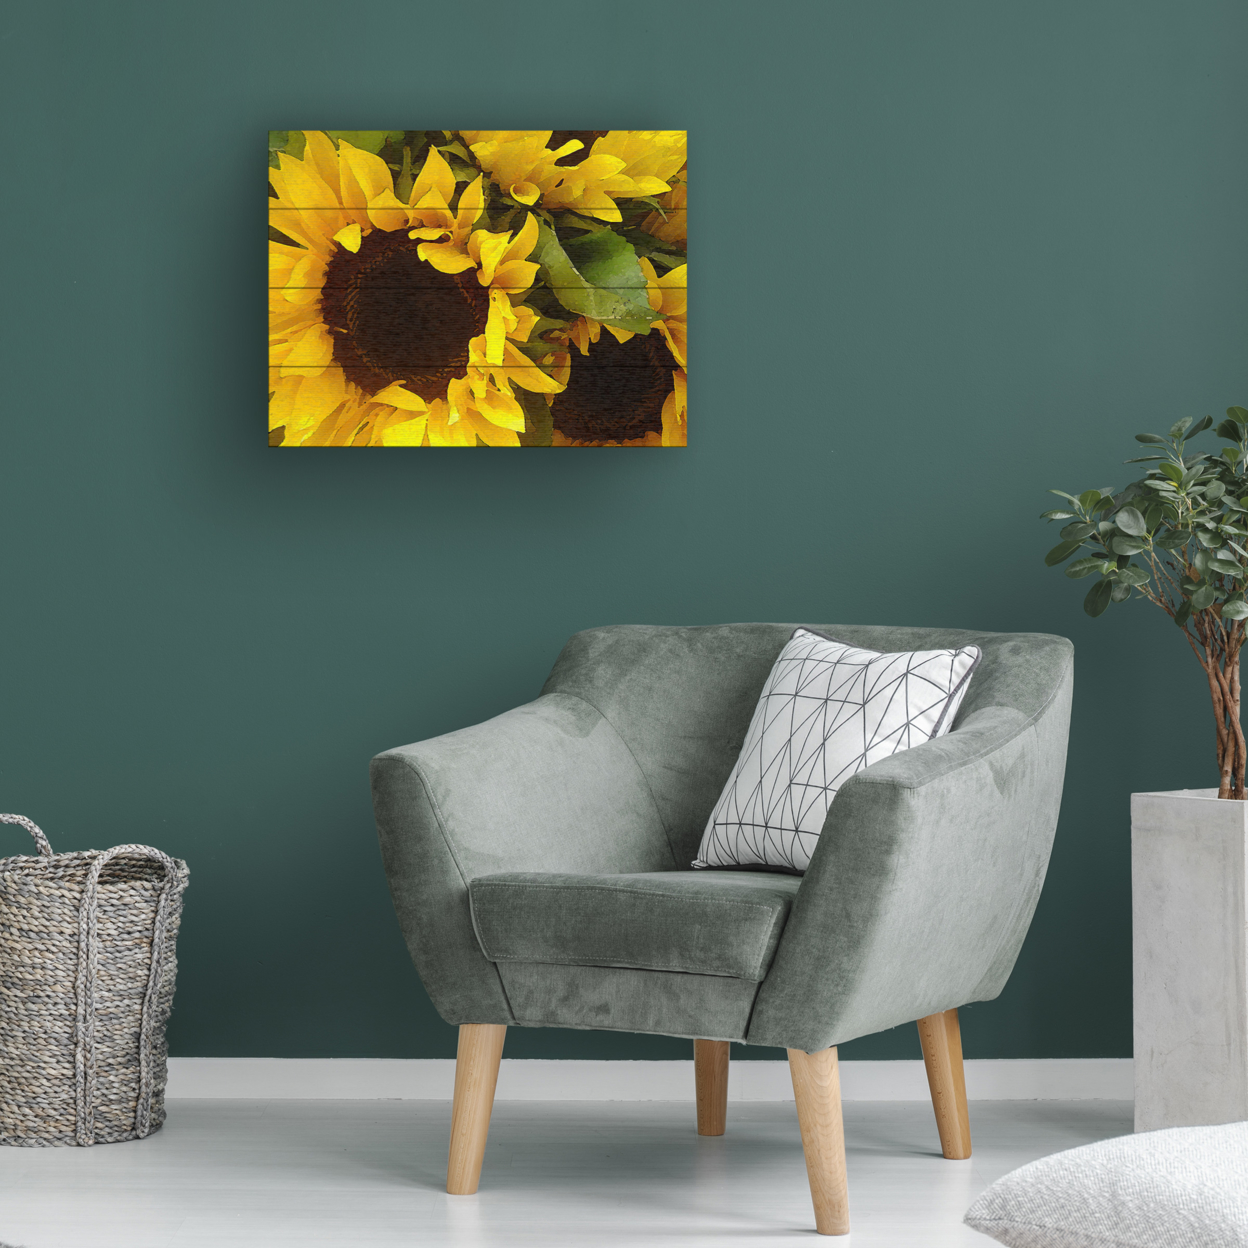 Wall Art 12 X 16 Inches Titled Sunflowers Ready To Hang Printed On Wooden Planks